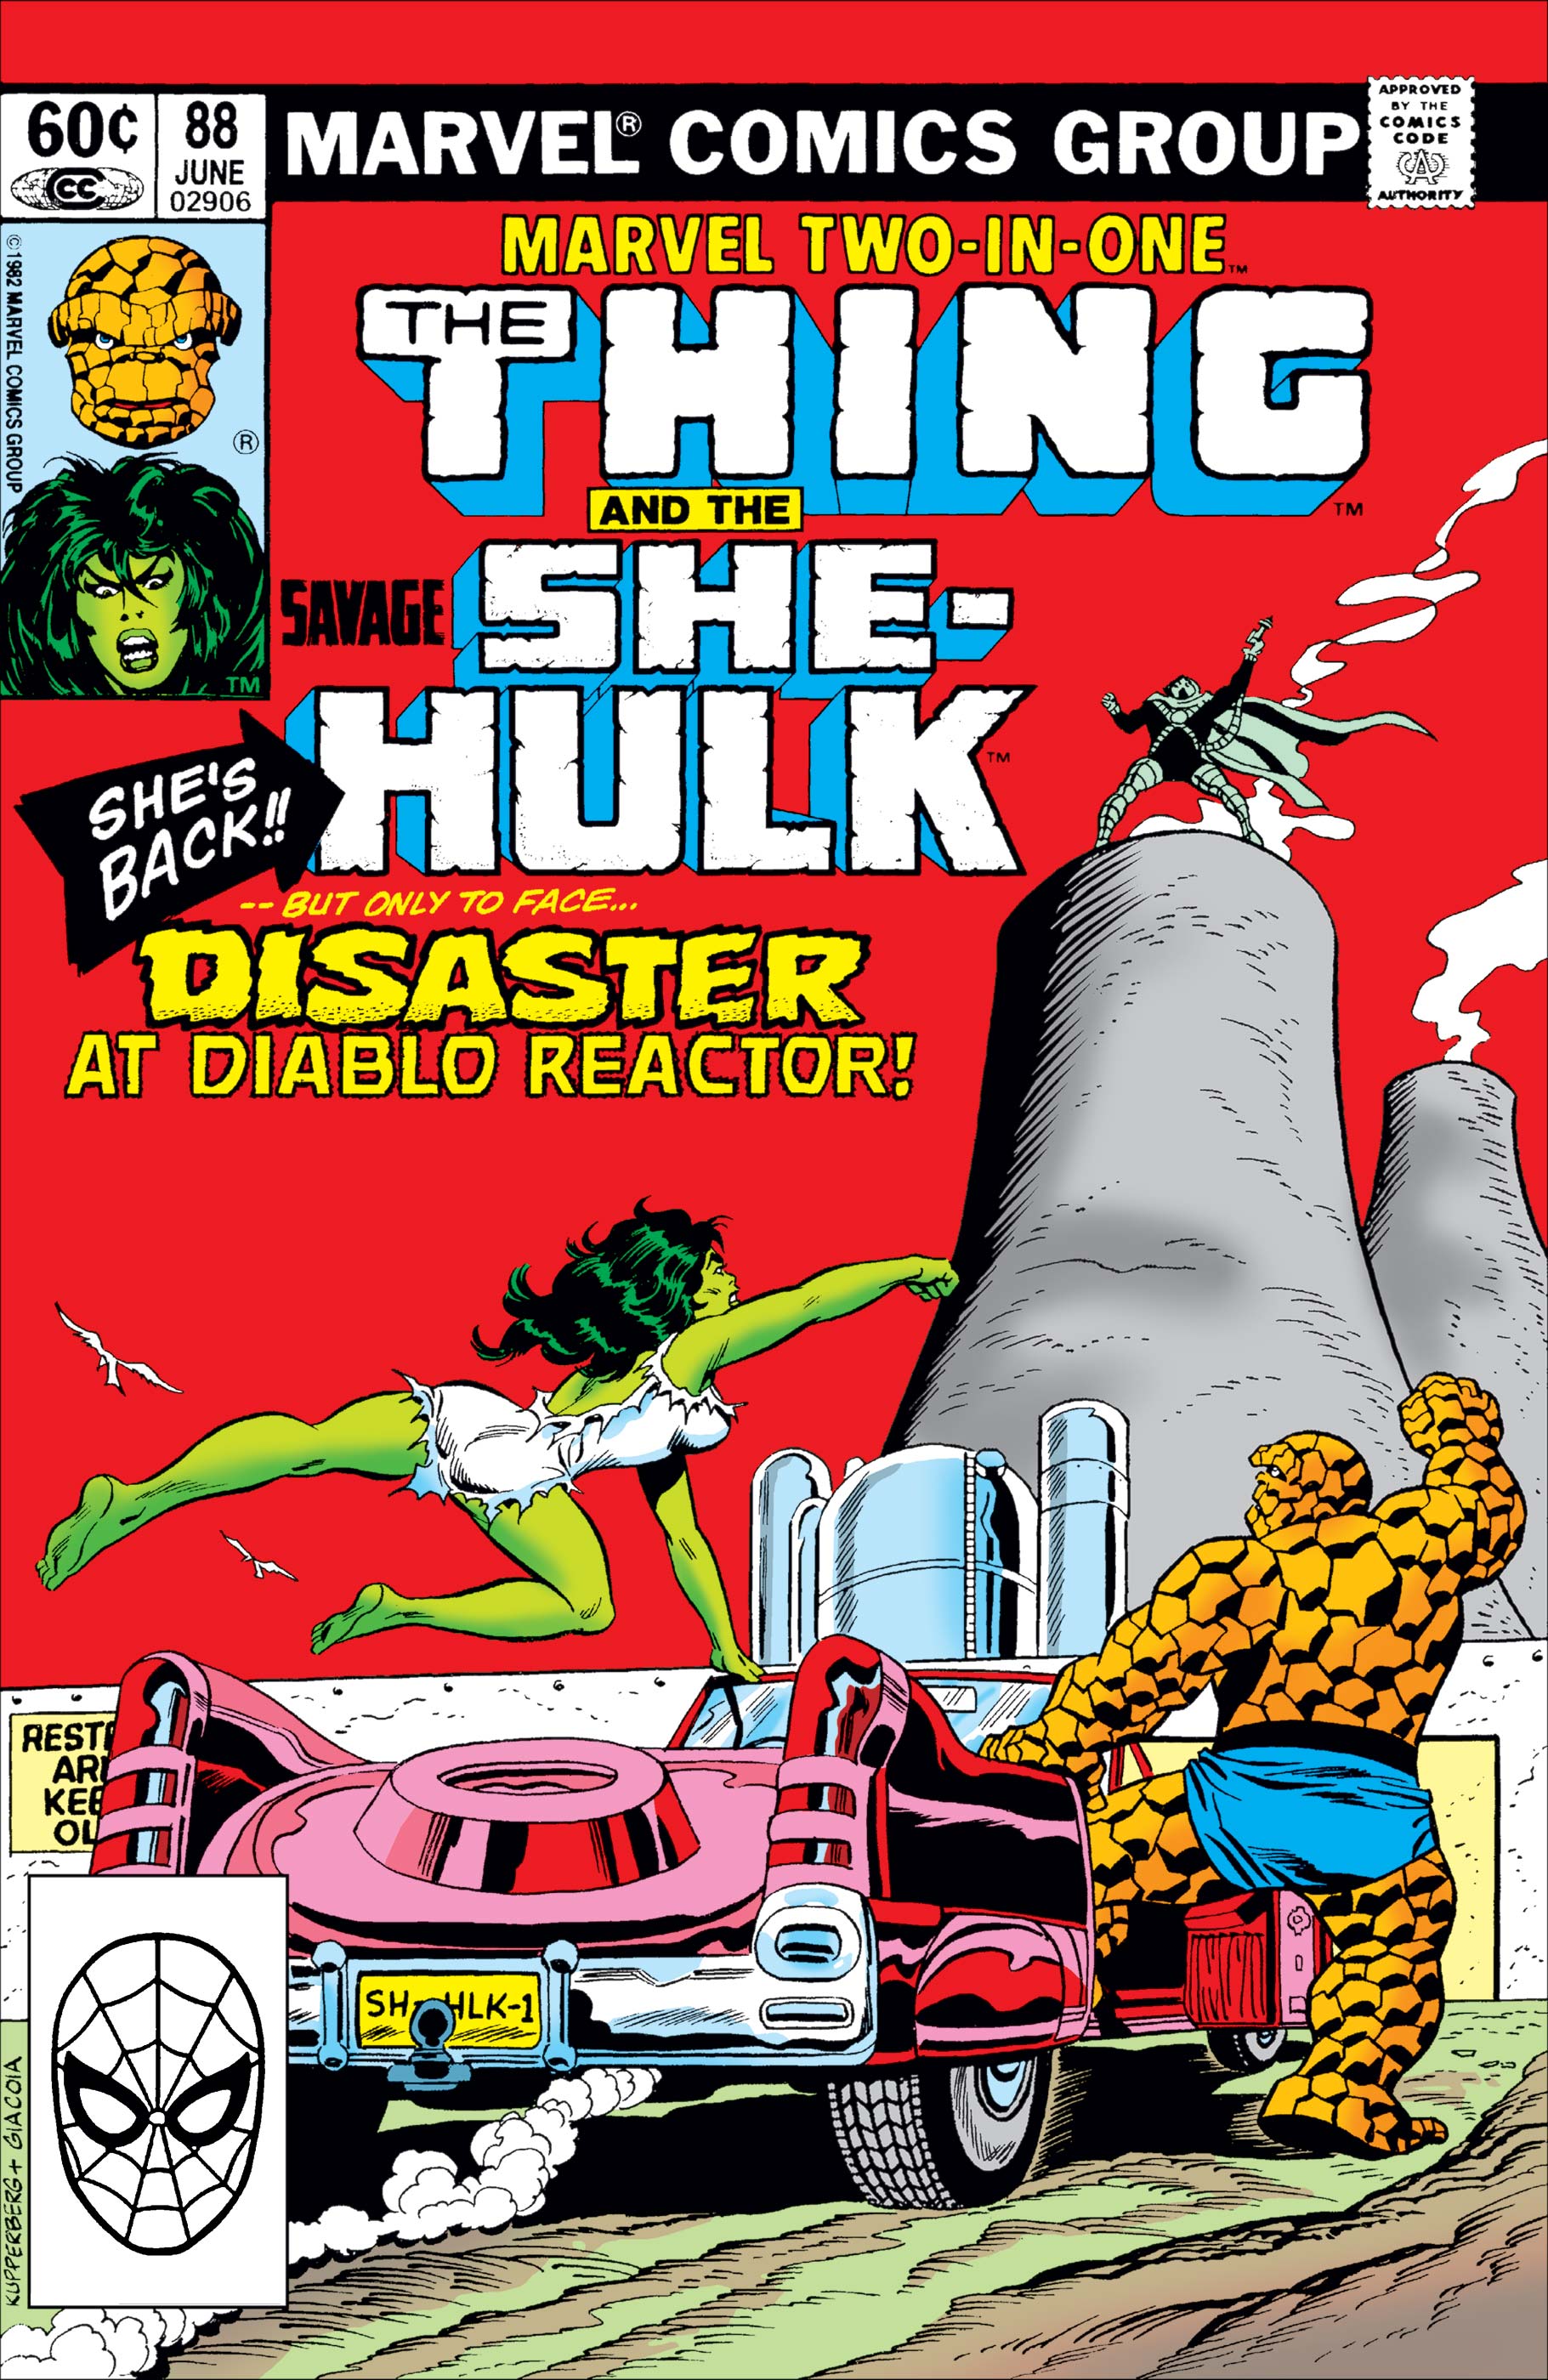 Marvel Two-in-One (1974) #88